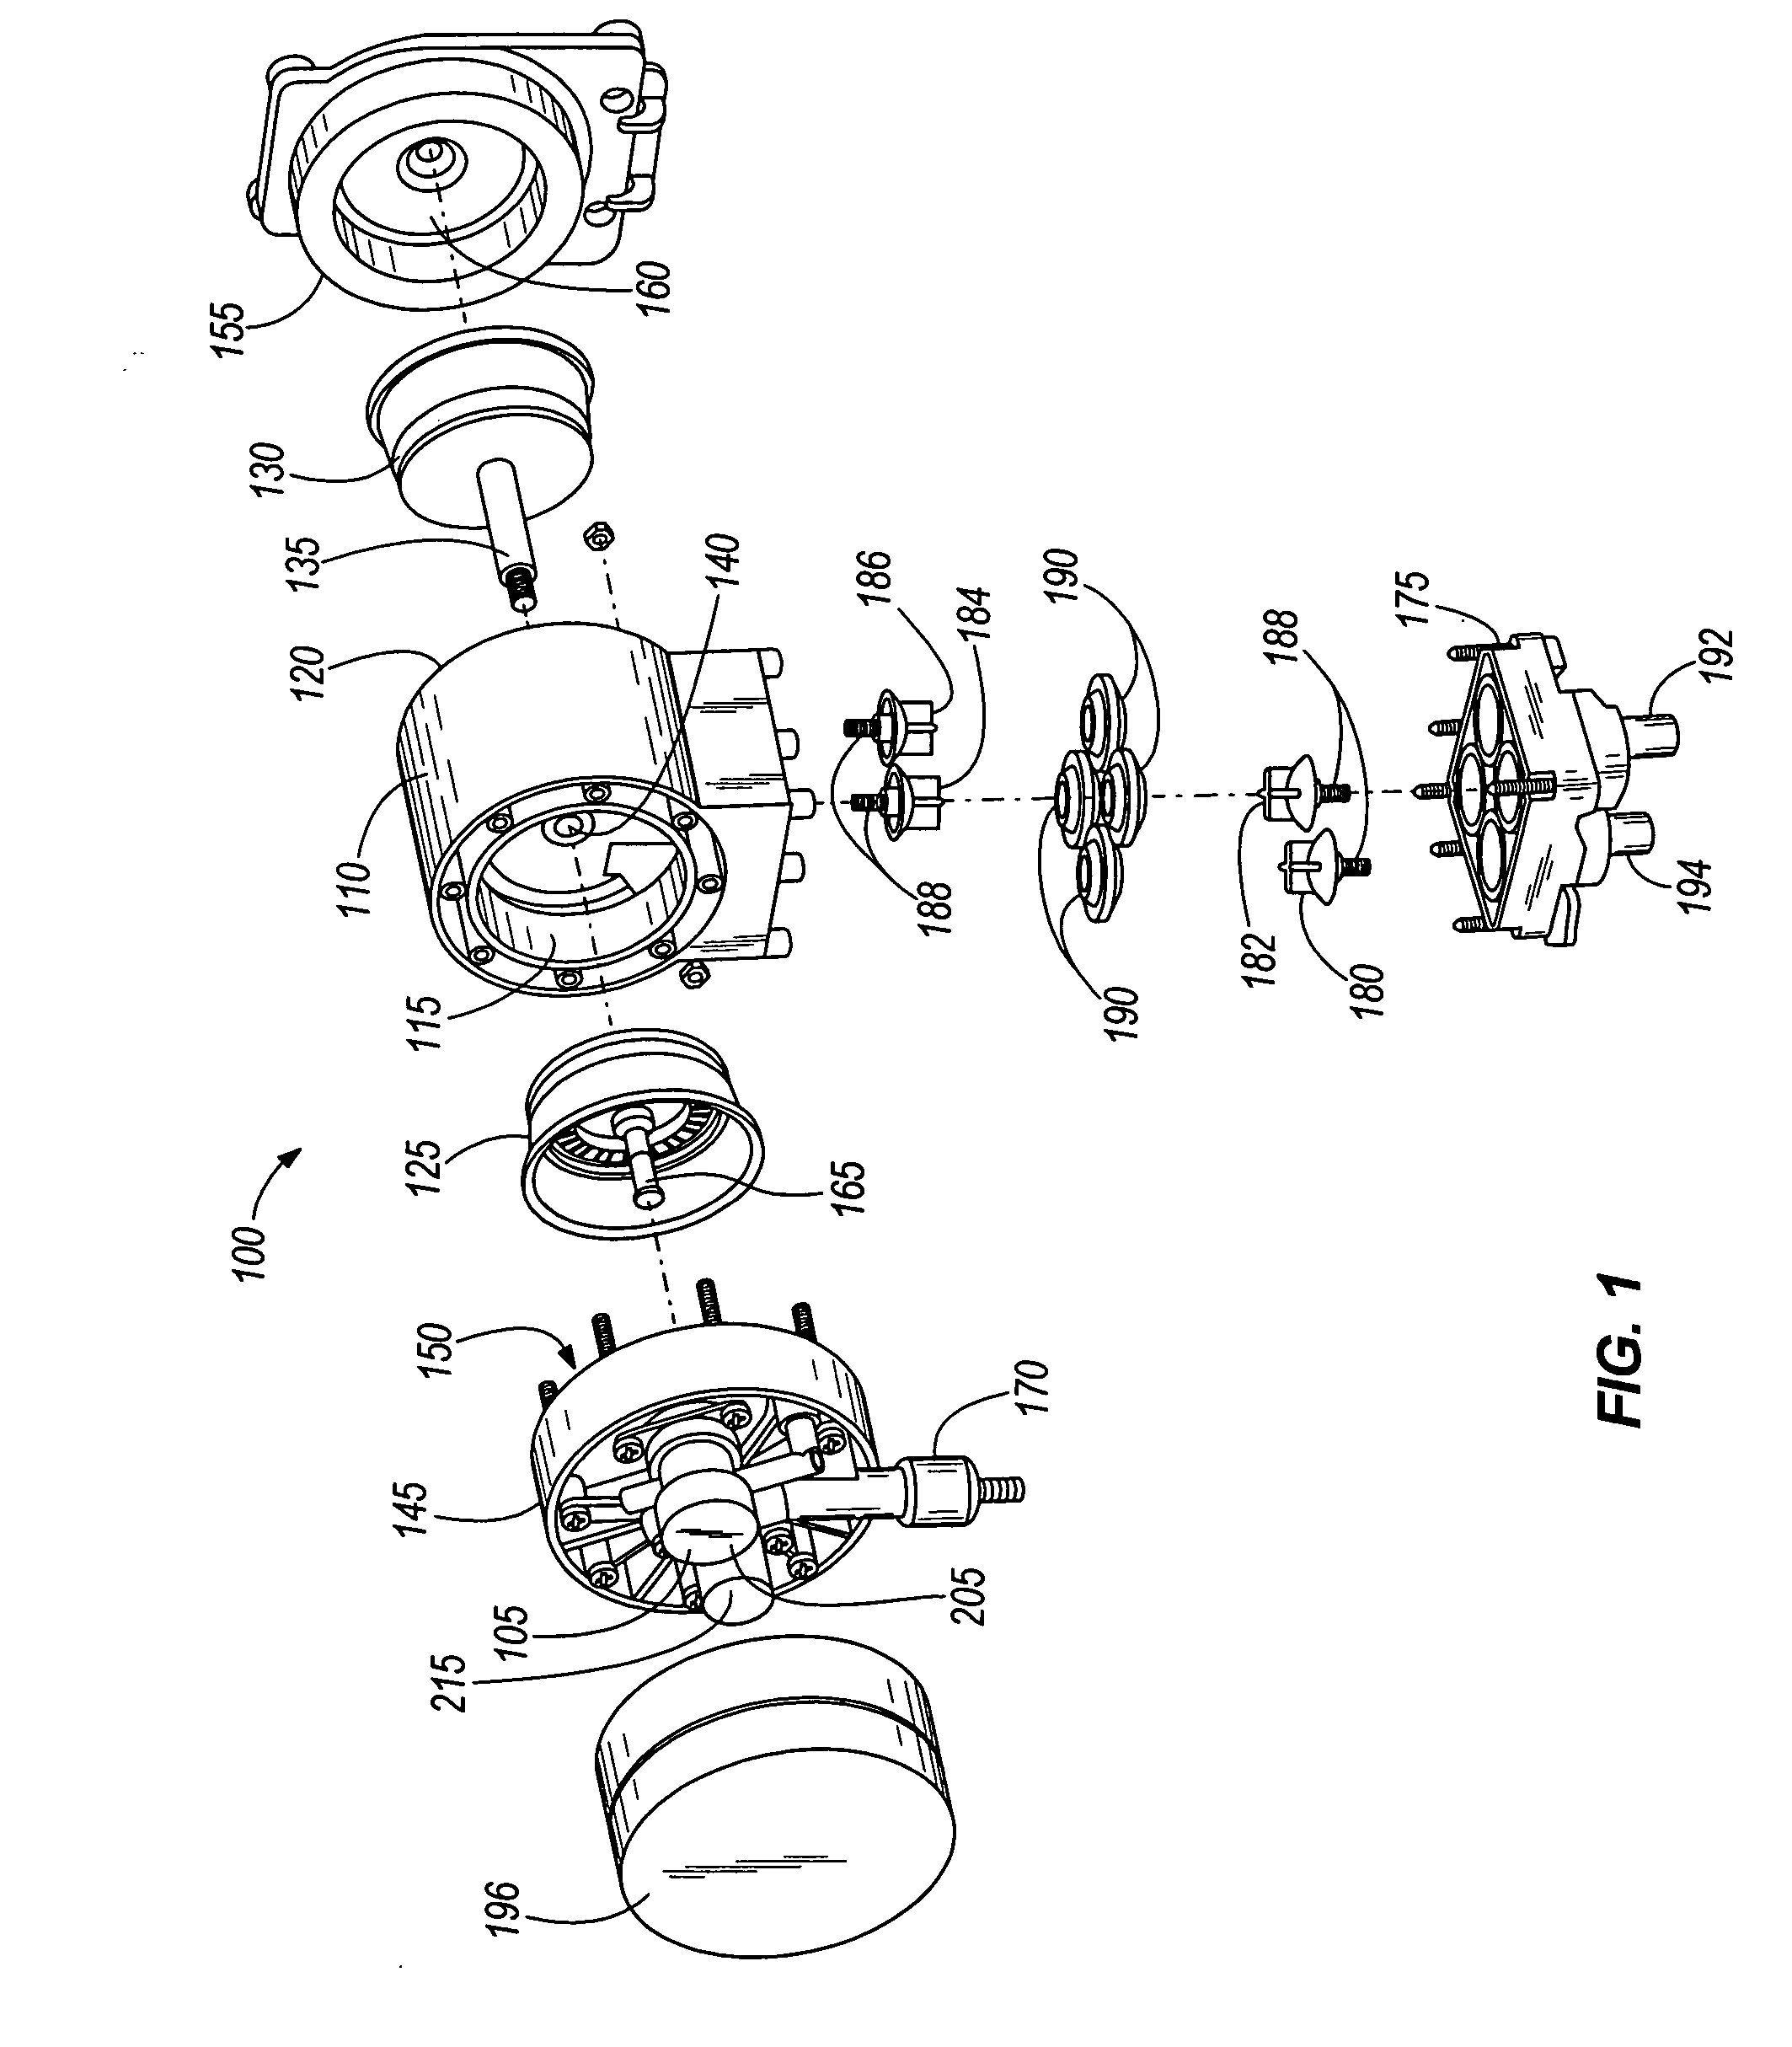 Pump and valve actuator system and method